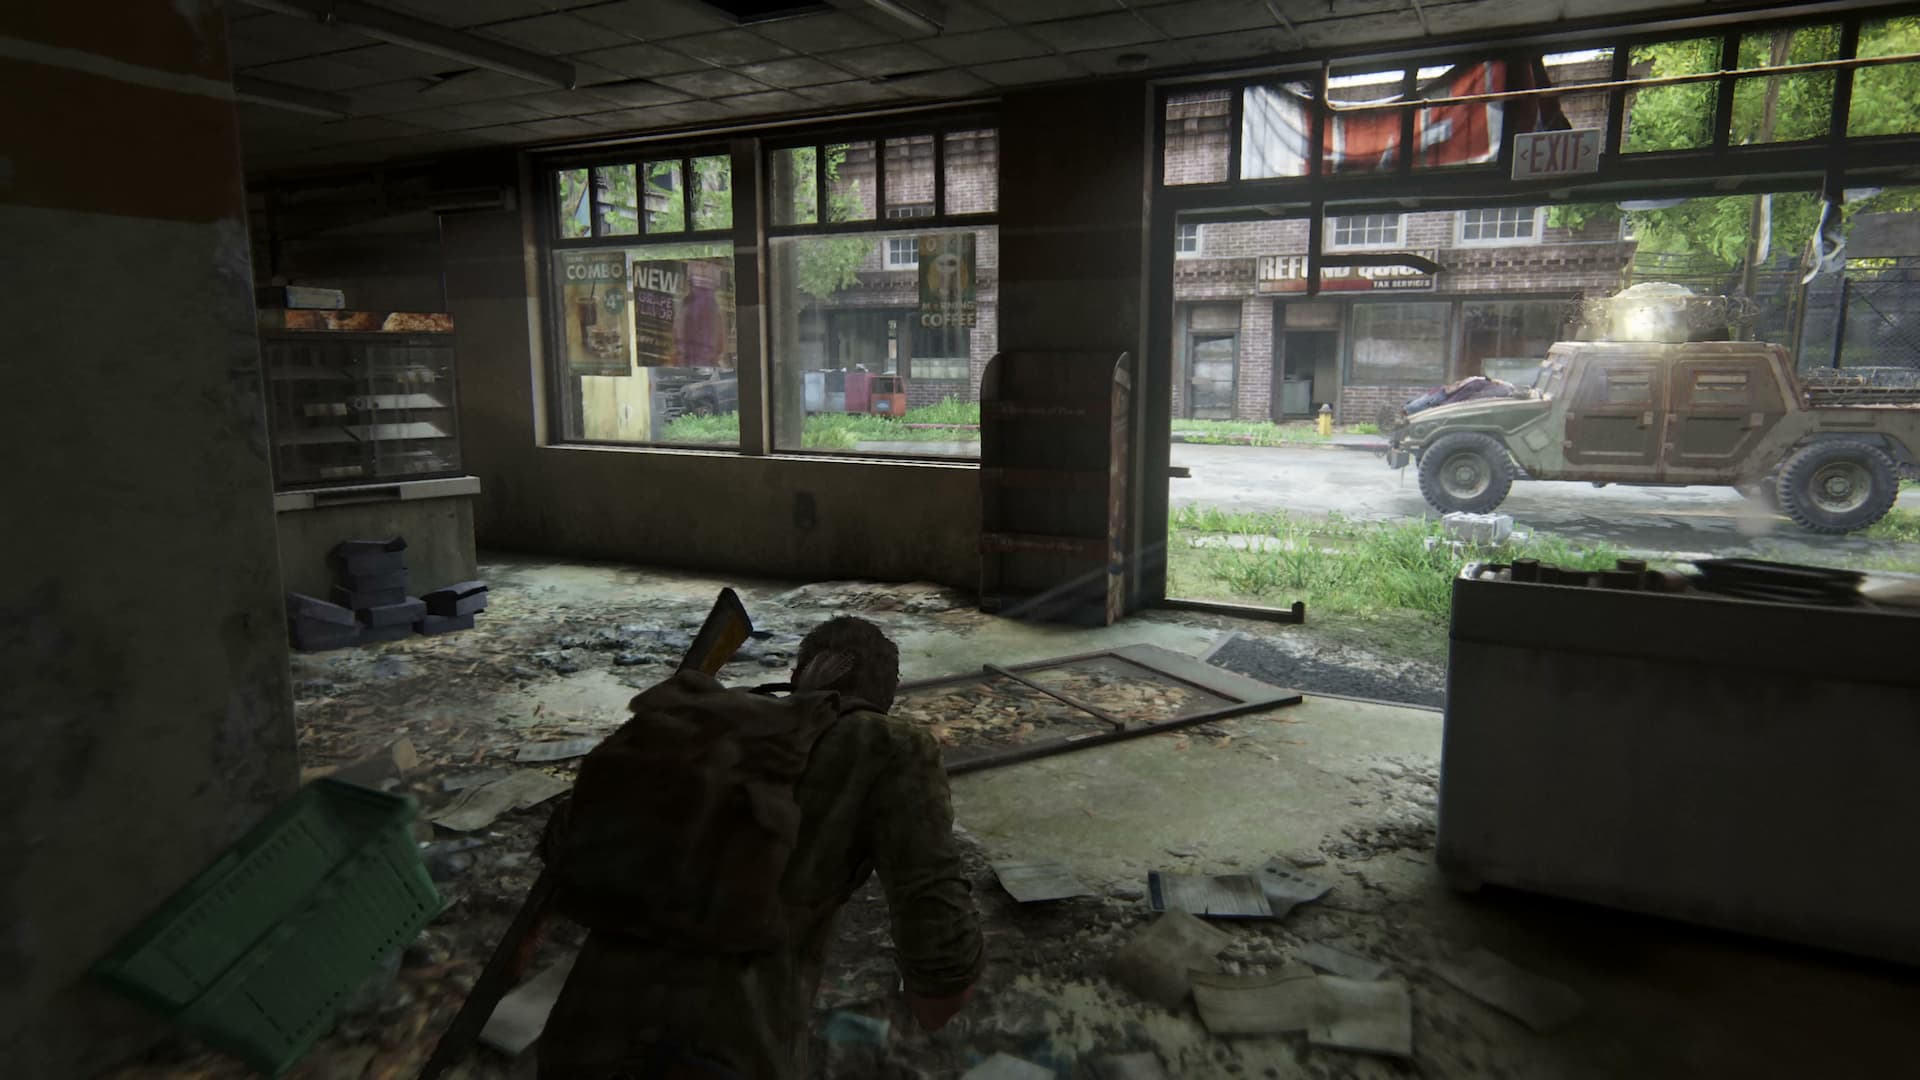 The Last of Us, with Joel, a man in a flannel shirt, creeping towards an armored car.